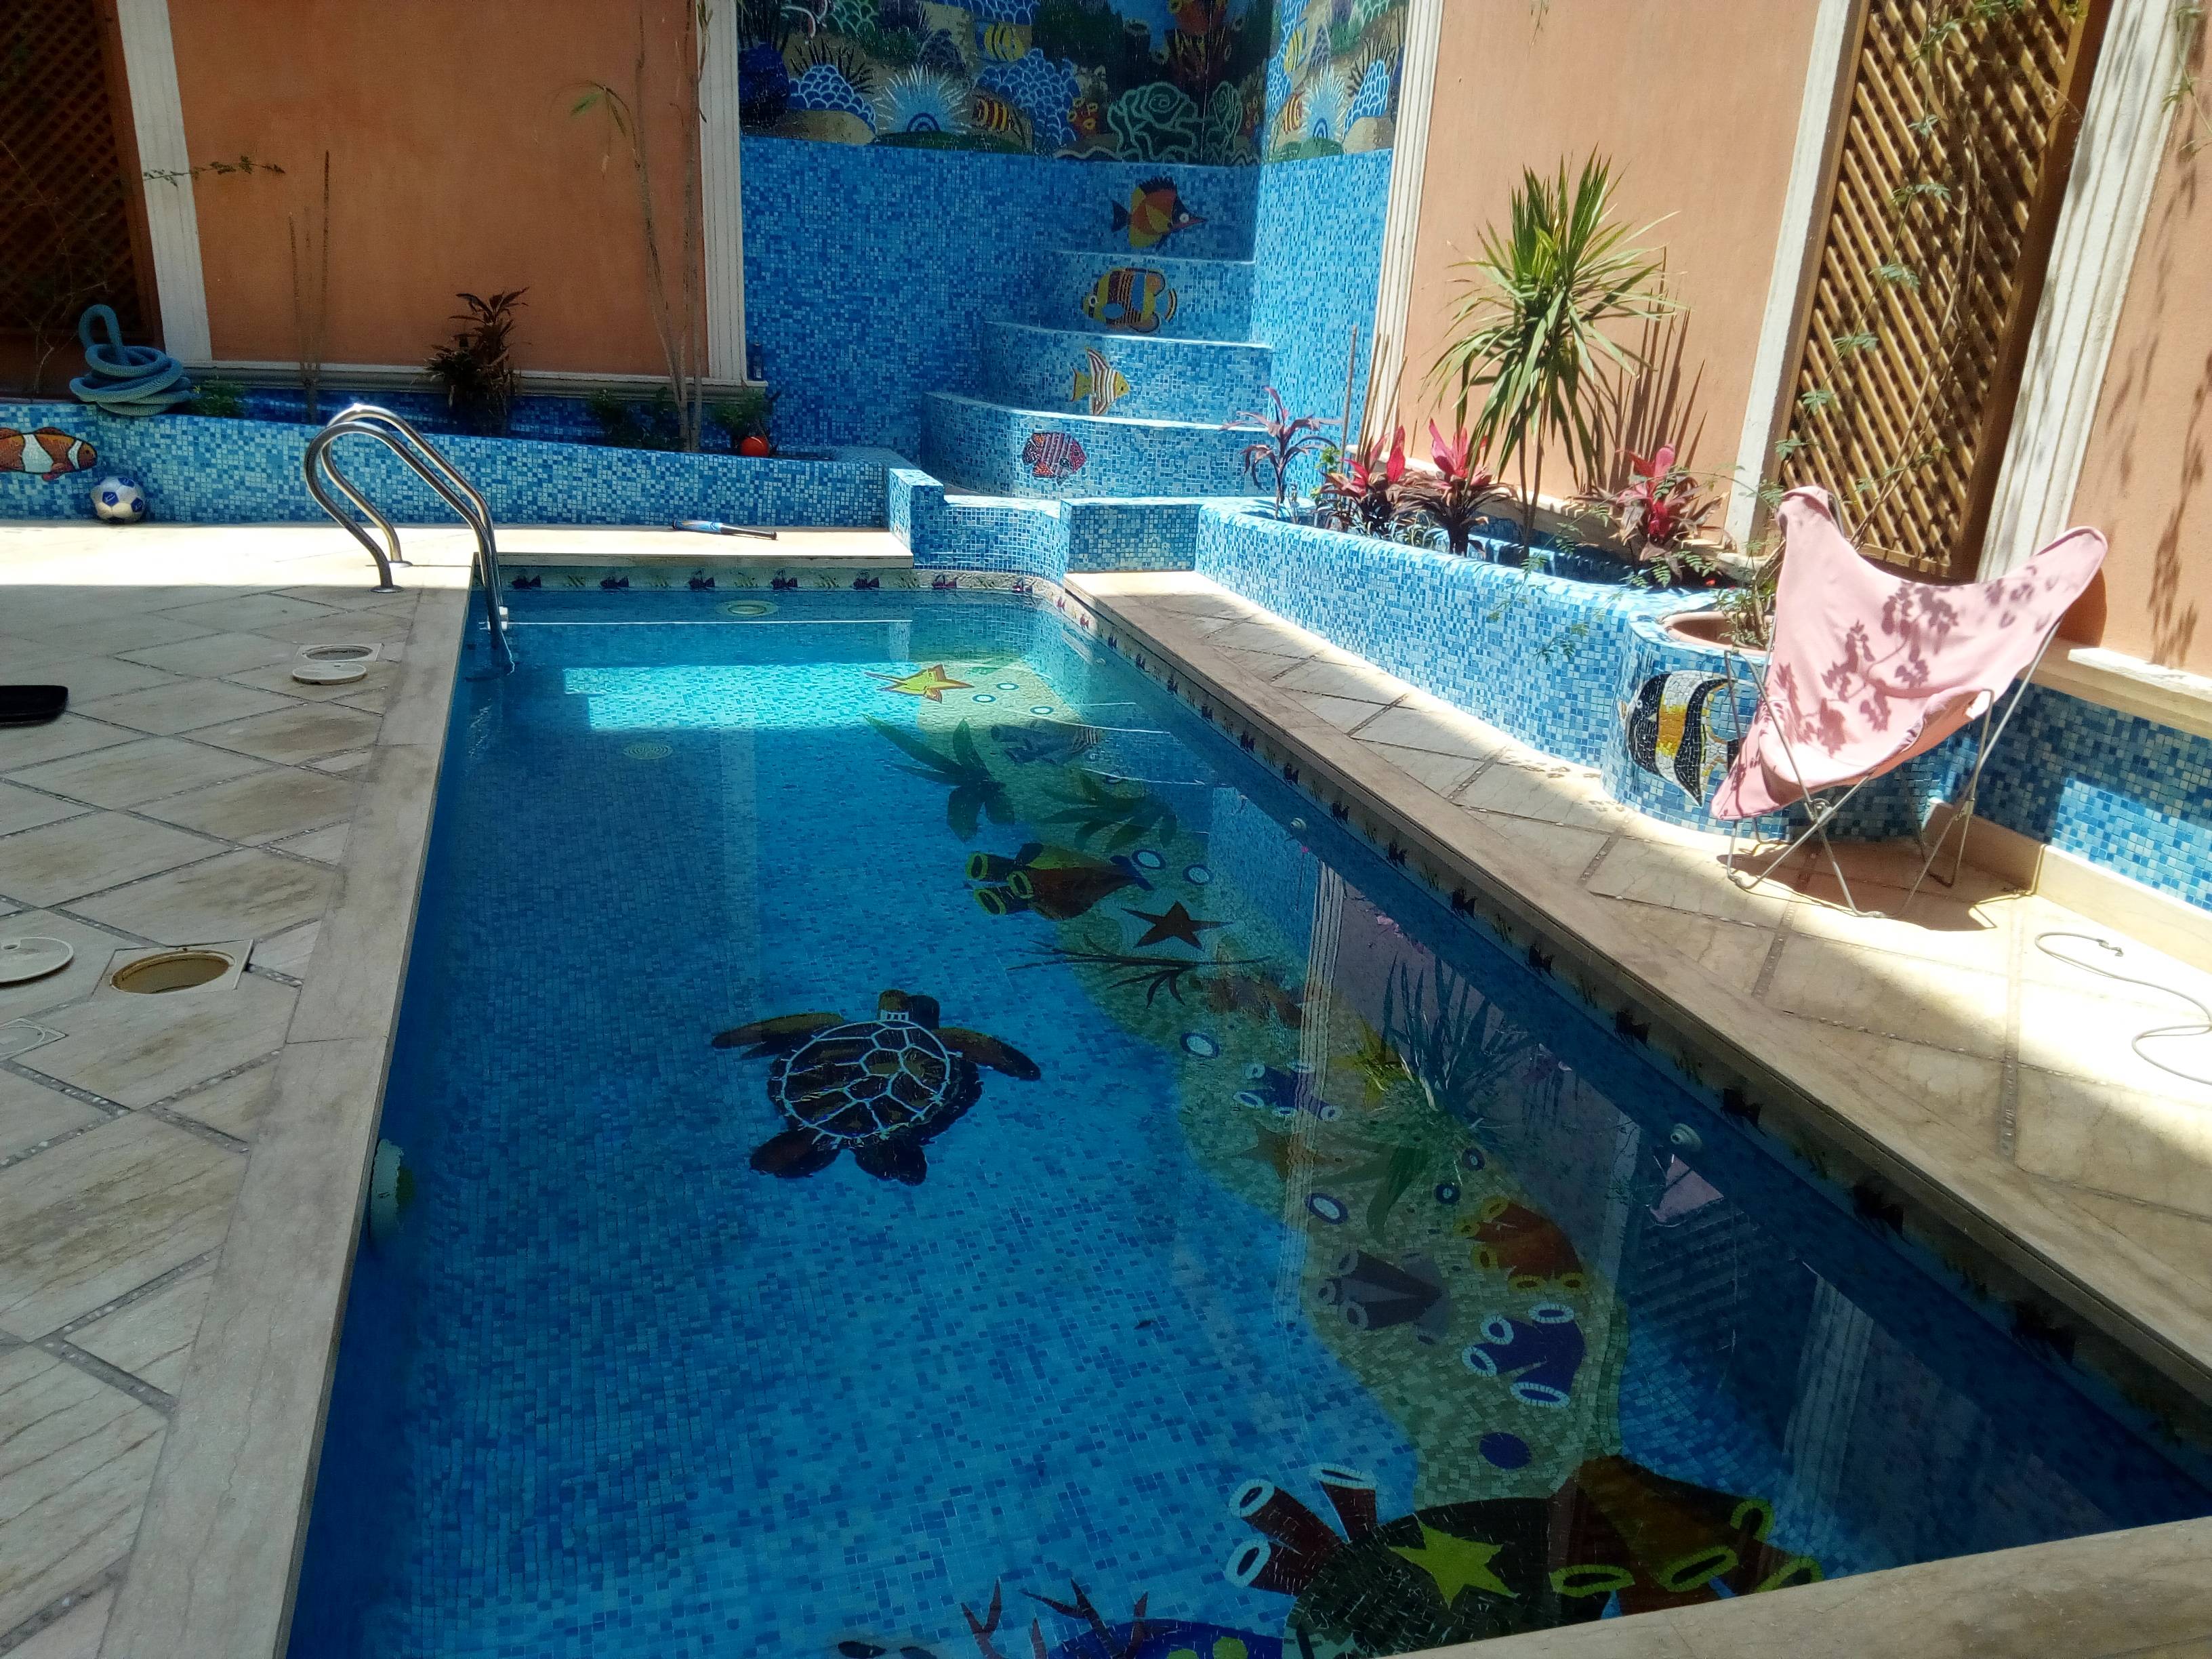 Swimming pool Askimr private villa first assembly